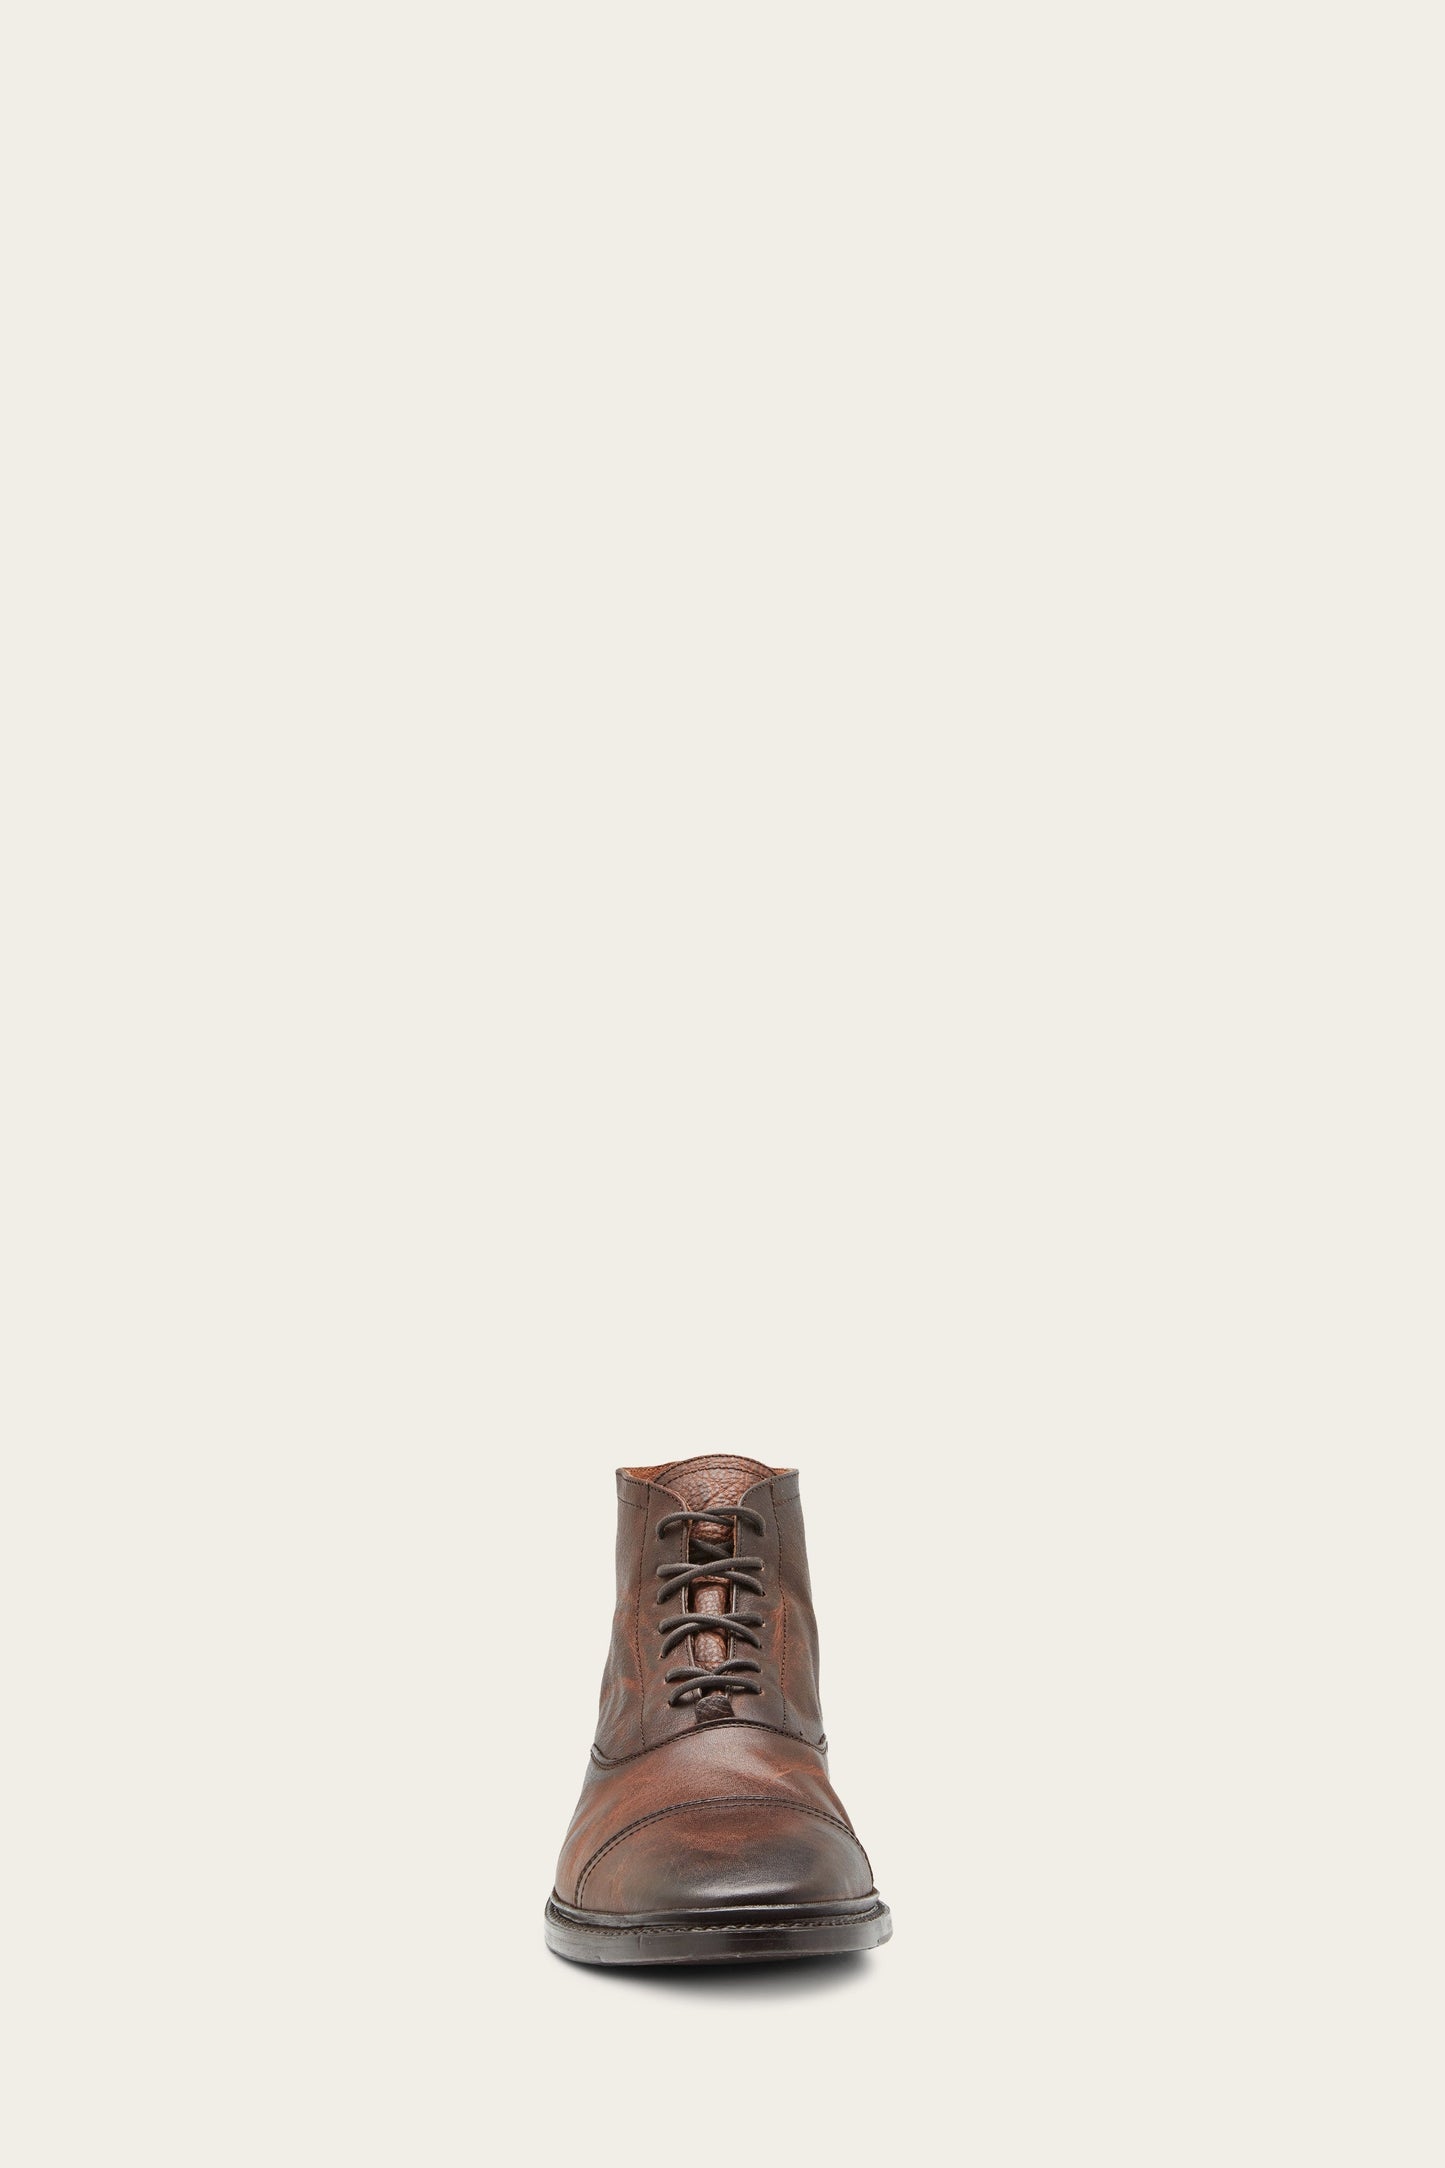 Paul Lace Up - Walnut - Front